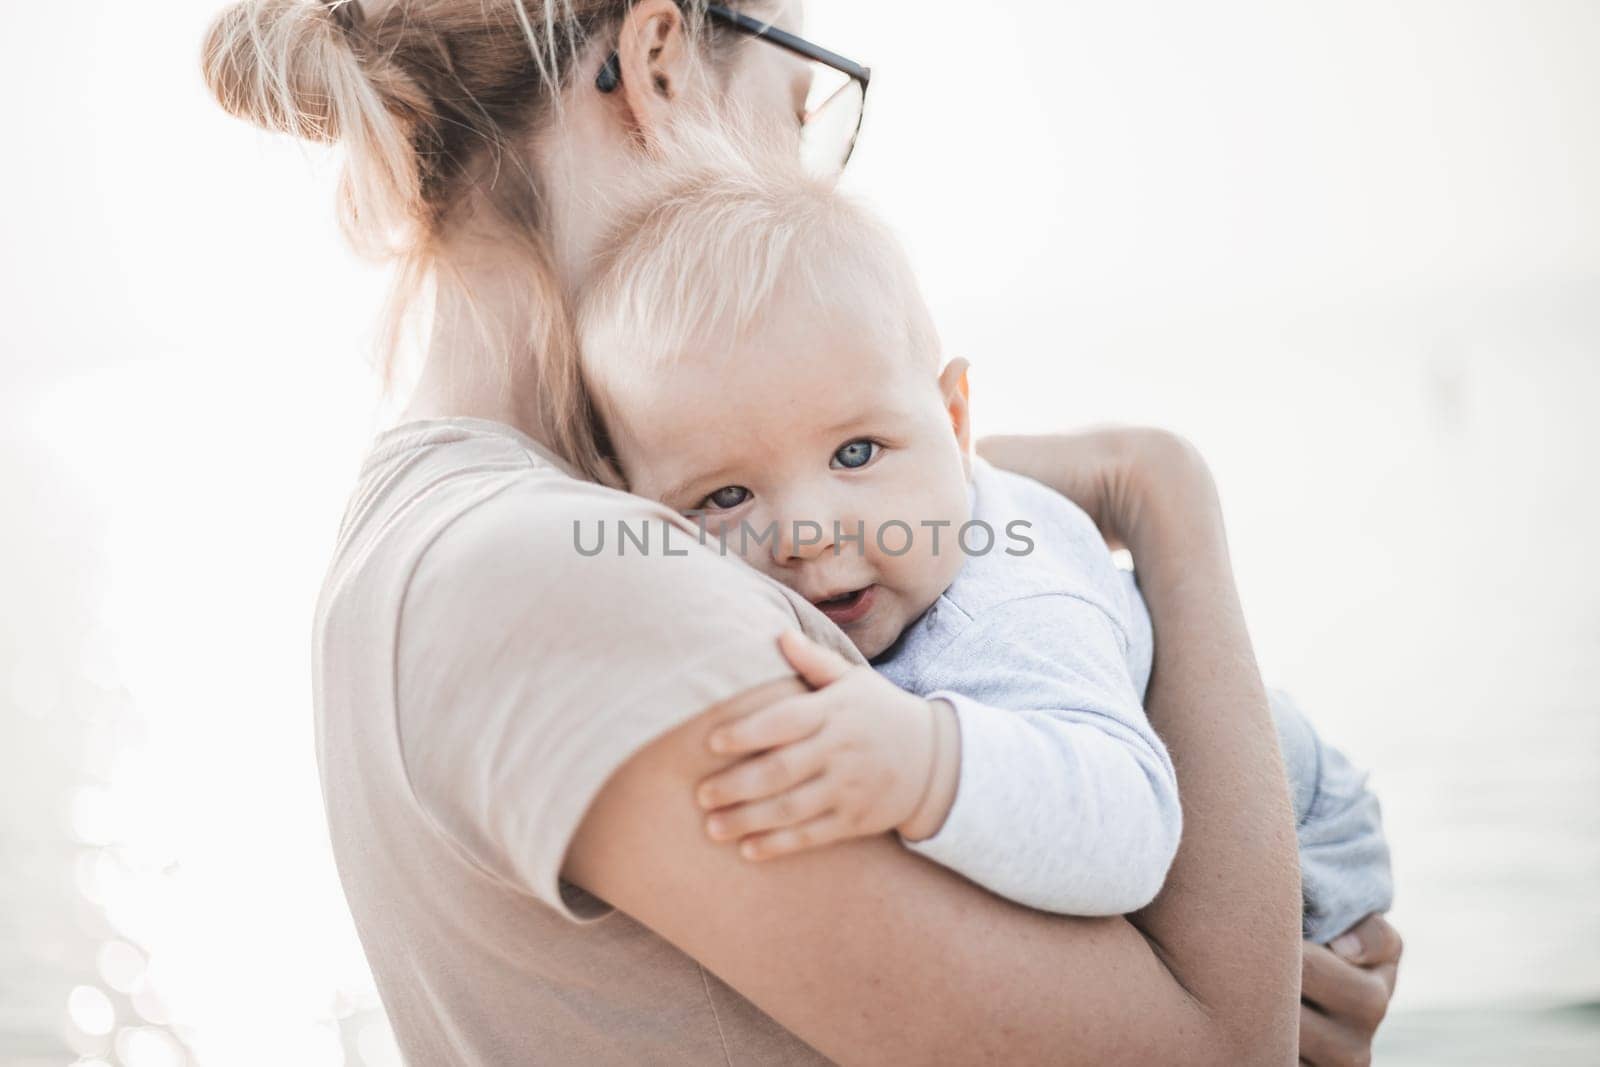 Tender woman caressing her little baby boy infant child outdoors. Mother's unconditional love for her child.